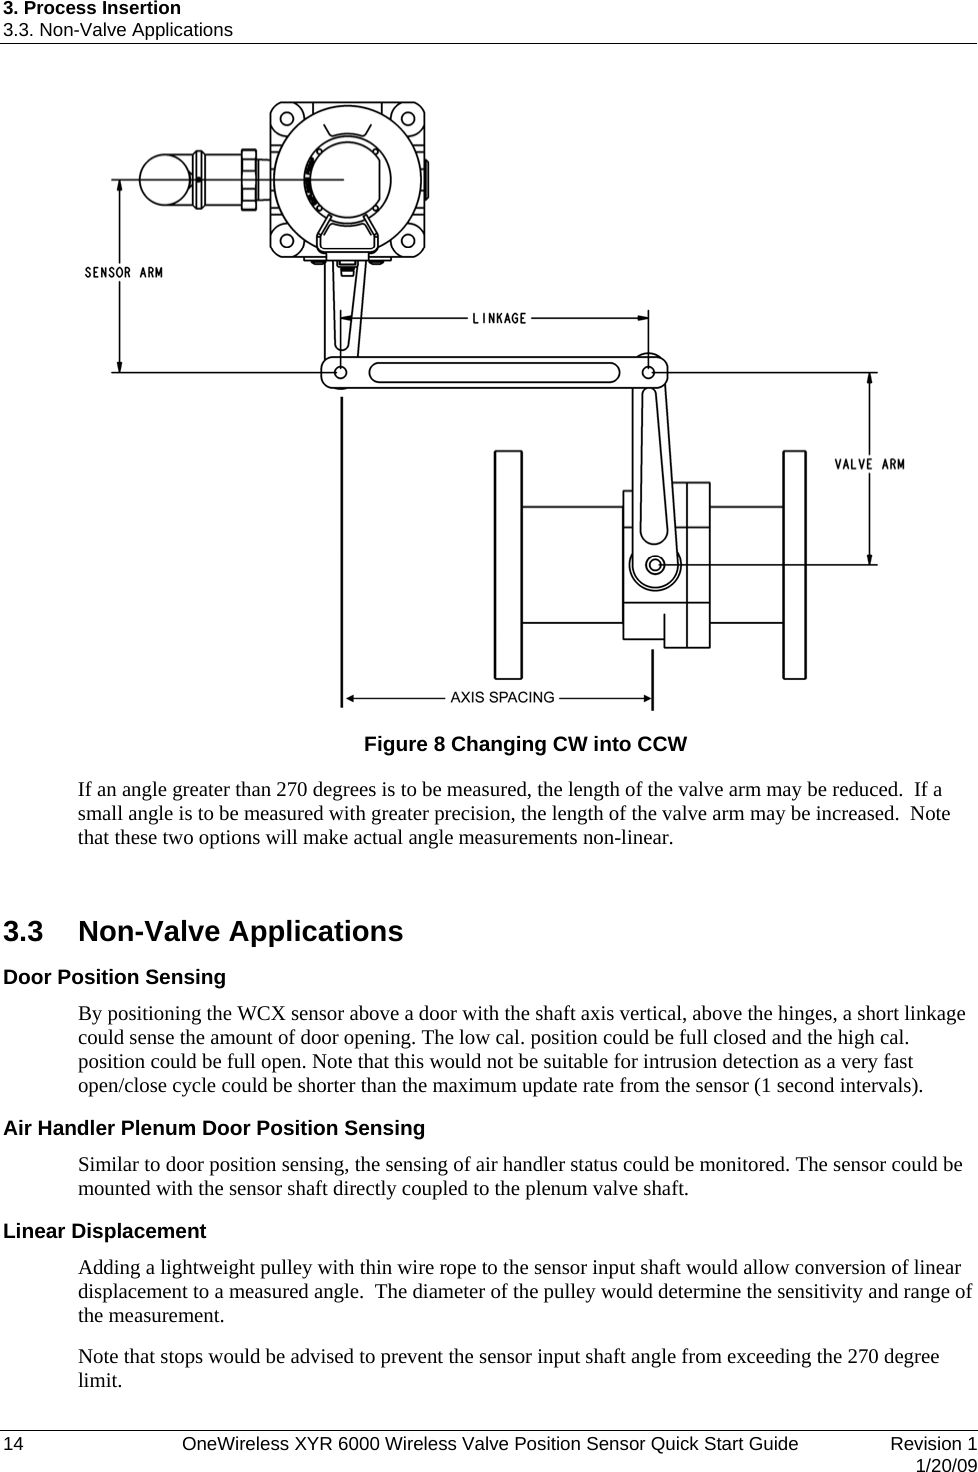 3. Process Insertion 3.3. Non-Valve Applications  Figure 8 Changing CW into CCW  If an angle greater than 270 degrees is to be measured, the length of the valve arm may be reduced.  If a small angle is to be measured with greater precision, the length of the valve arm may be increased.  Note that these two options will make actual angle measurements non-linear.  3.3 Non-Valve Applications Door Position Sensing By positioning the WCX sensor above a door with the shaft axis vertical, above the hinges, a short linkage could sense the amount of door opening. The low cal. position could be full closed and the high cal. position could be full open. Note that this would not be suitable for intrusion detection as a very fast open/close cycle could be shorter than the maximum update rate from the sensor (1 second intervals). Air Handler Plenum Door Position Sensing Similar to door position sensing, the sensing of air handler status could be monitored. The sensor could be mounted with the sensor shaft directly coupled to the plenum valve shaft. Linear Displacement Adding a lightweight pulley with thin wire rope to the sensor input shaft would allow conversion of linear displacement to a measured angle.  The diameter of the pulley would determine the sensitivity and range of the measurement. Note that stops would be advised to prevent the sensor input shaft angle from exceeding the 270 degree limit. 14  OneWireless XYR 6000 Wireless Valve Position Sensor Quick Start Guide   Revision 1   1/20/09 